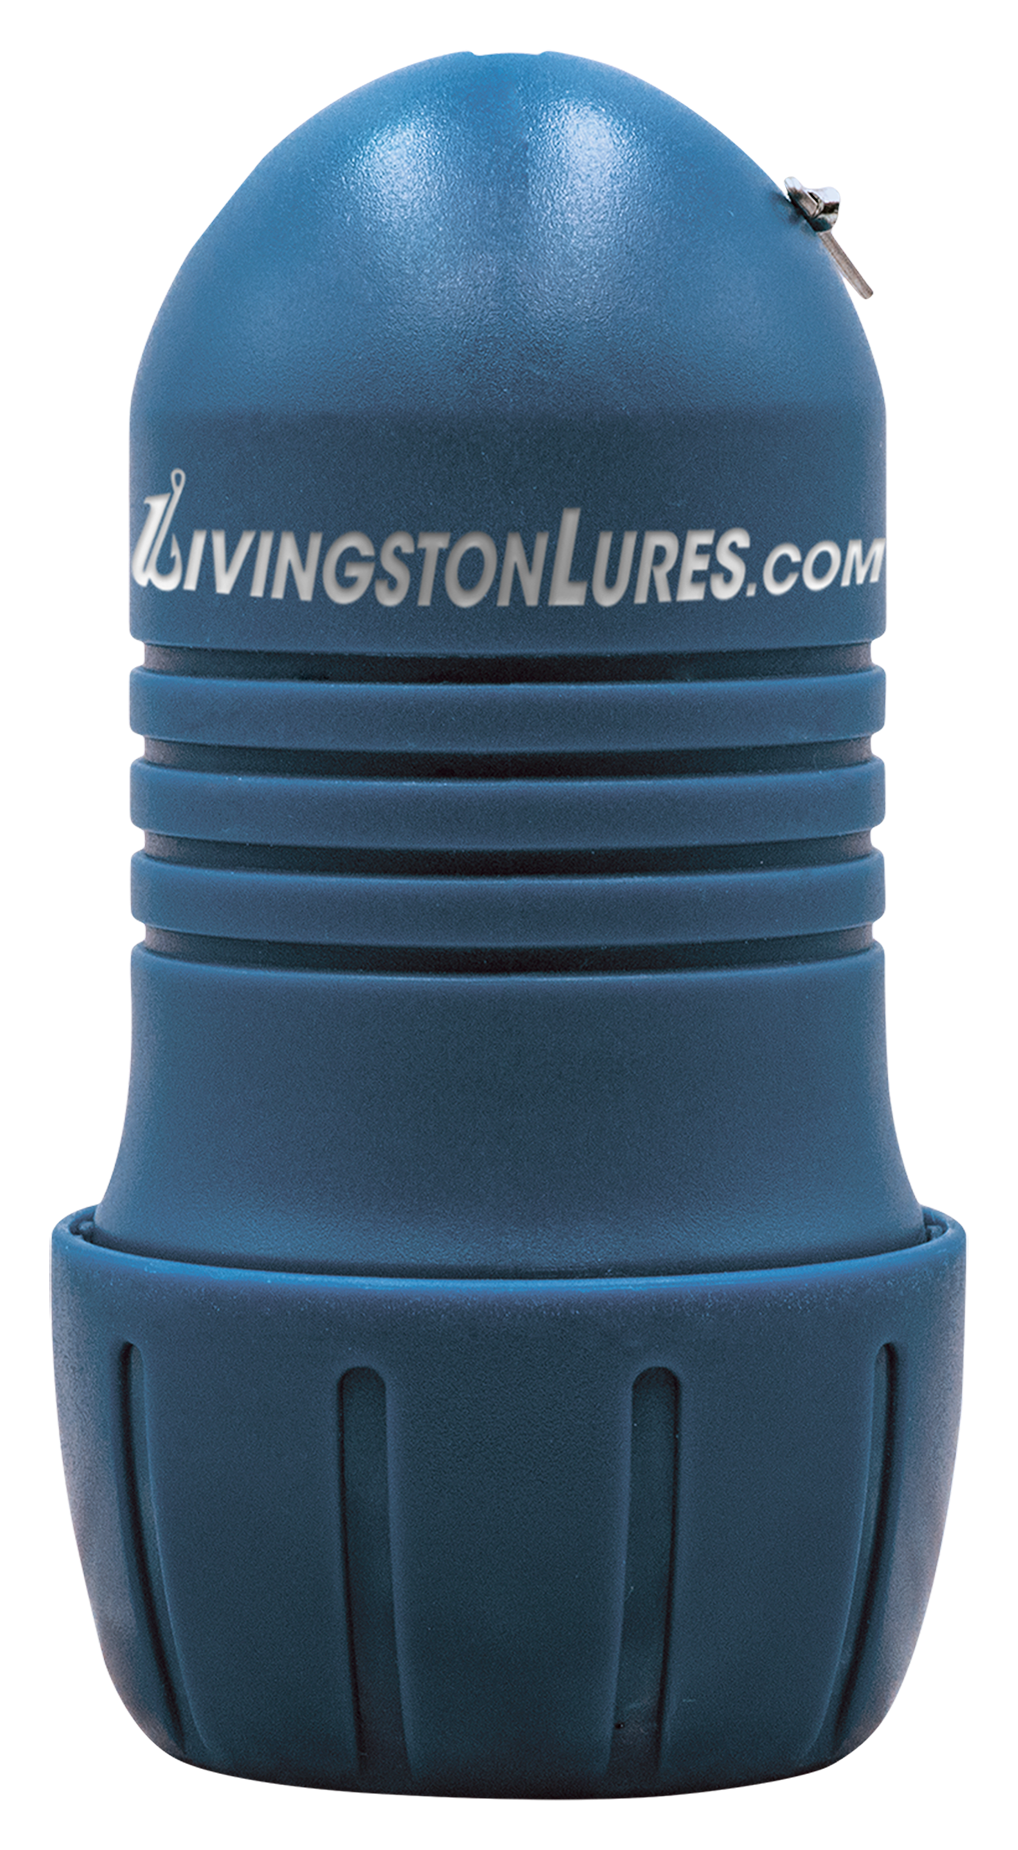 Livingston Lures Fish Call - Saltwater